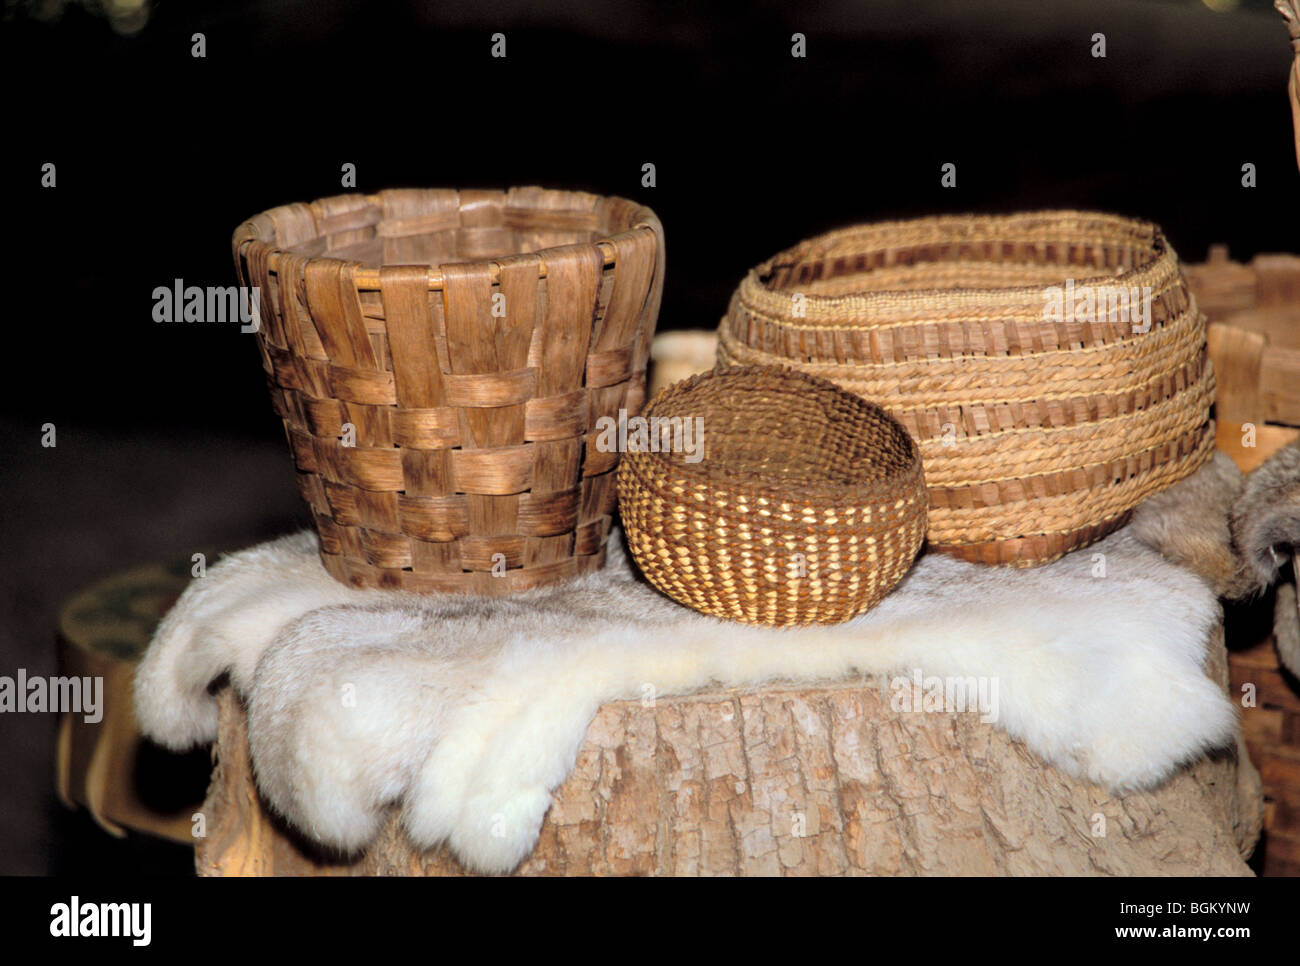 A collection of various style storage and gathering baskets made by the Suquamish Indian tribe of the Northwest Pacific Coast, Washington State Stock Photo